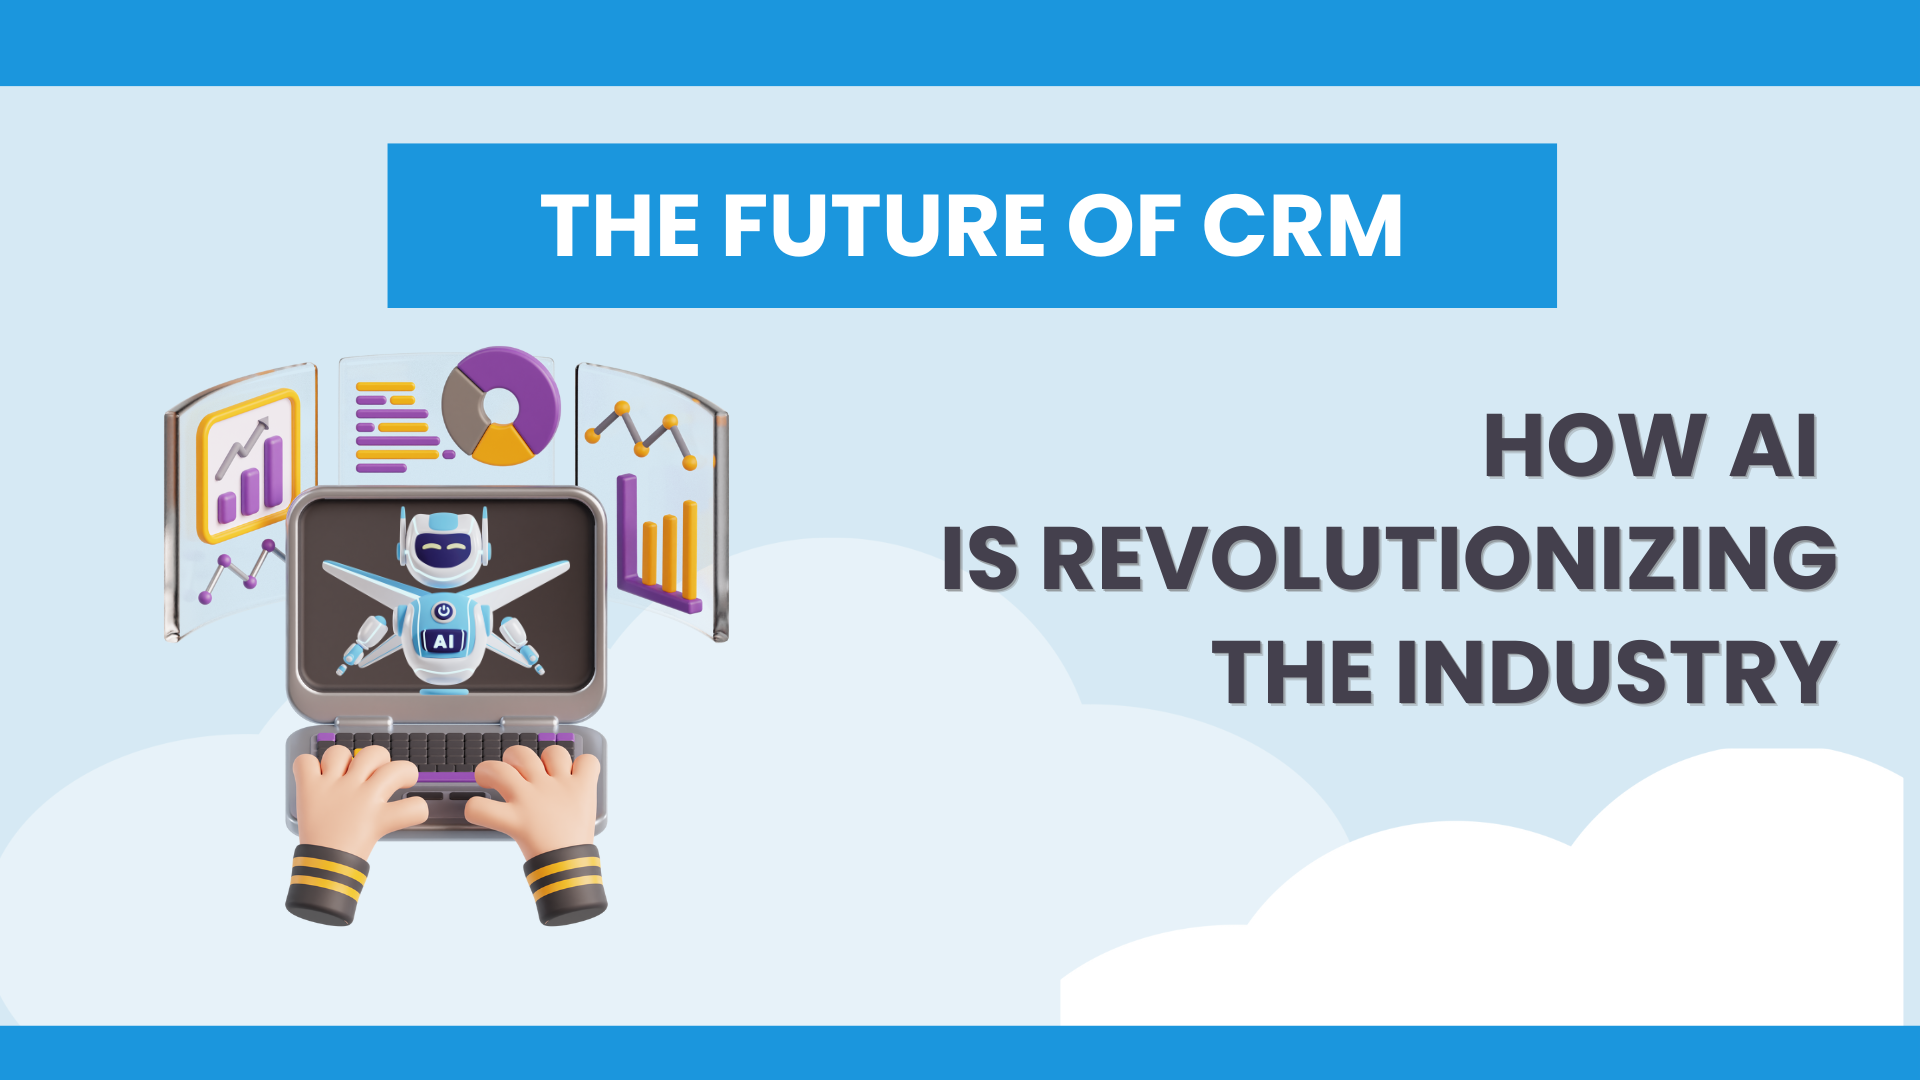 The Future of CRM: How AI is Revolutionizing the Industry